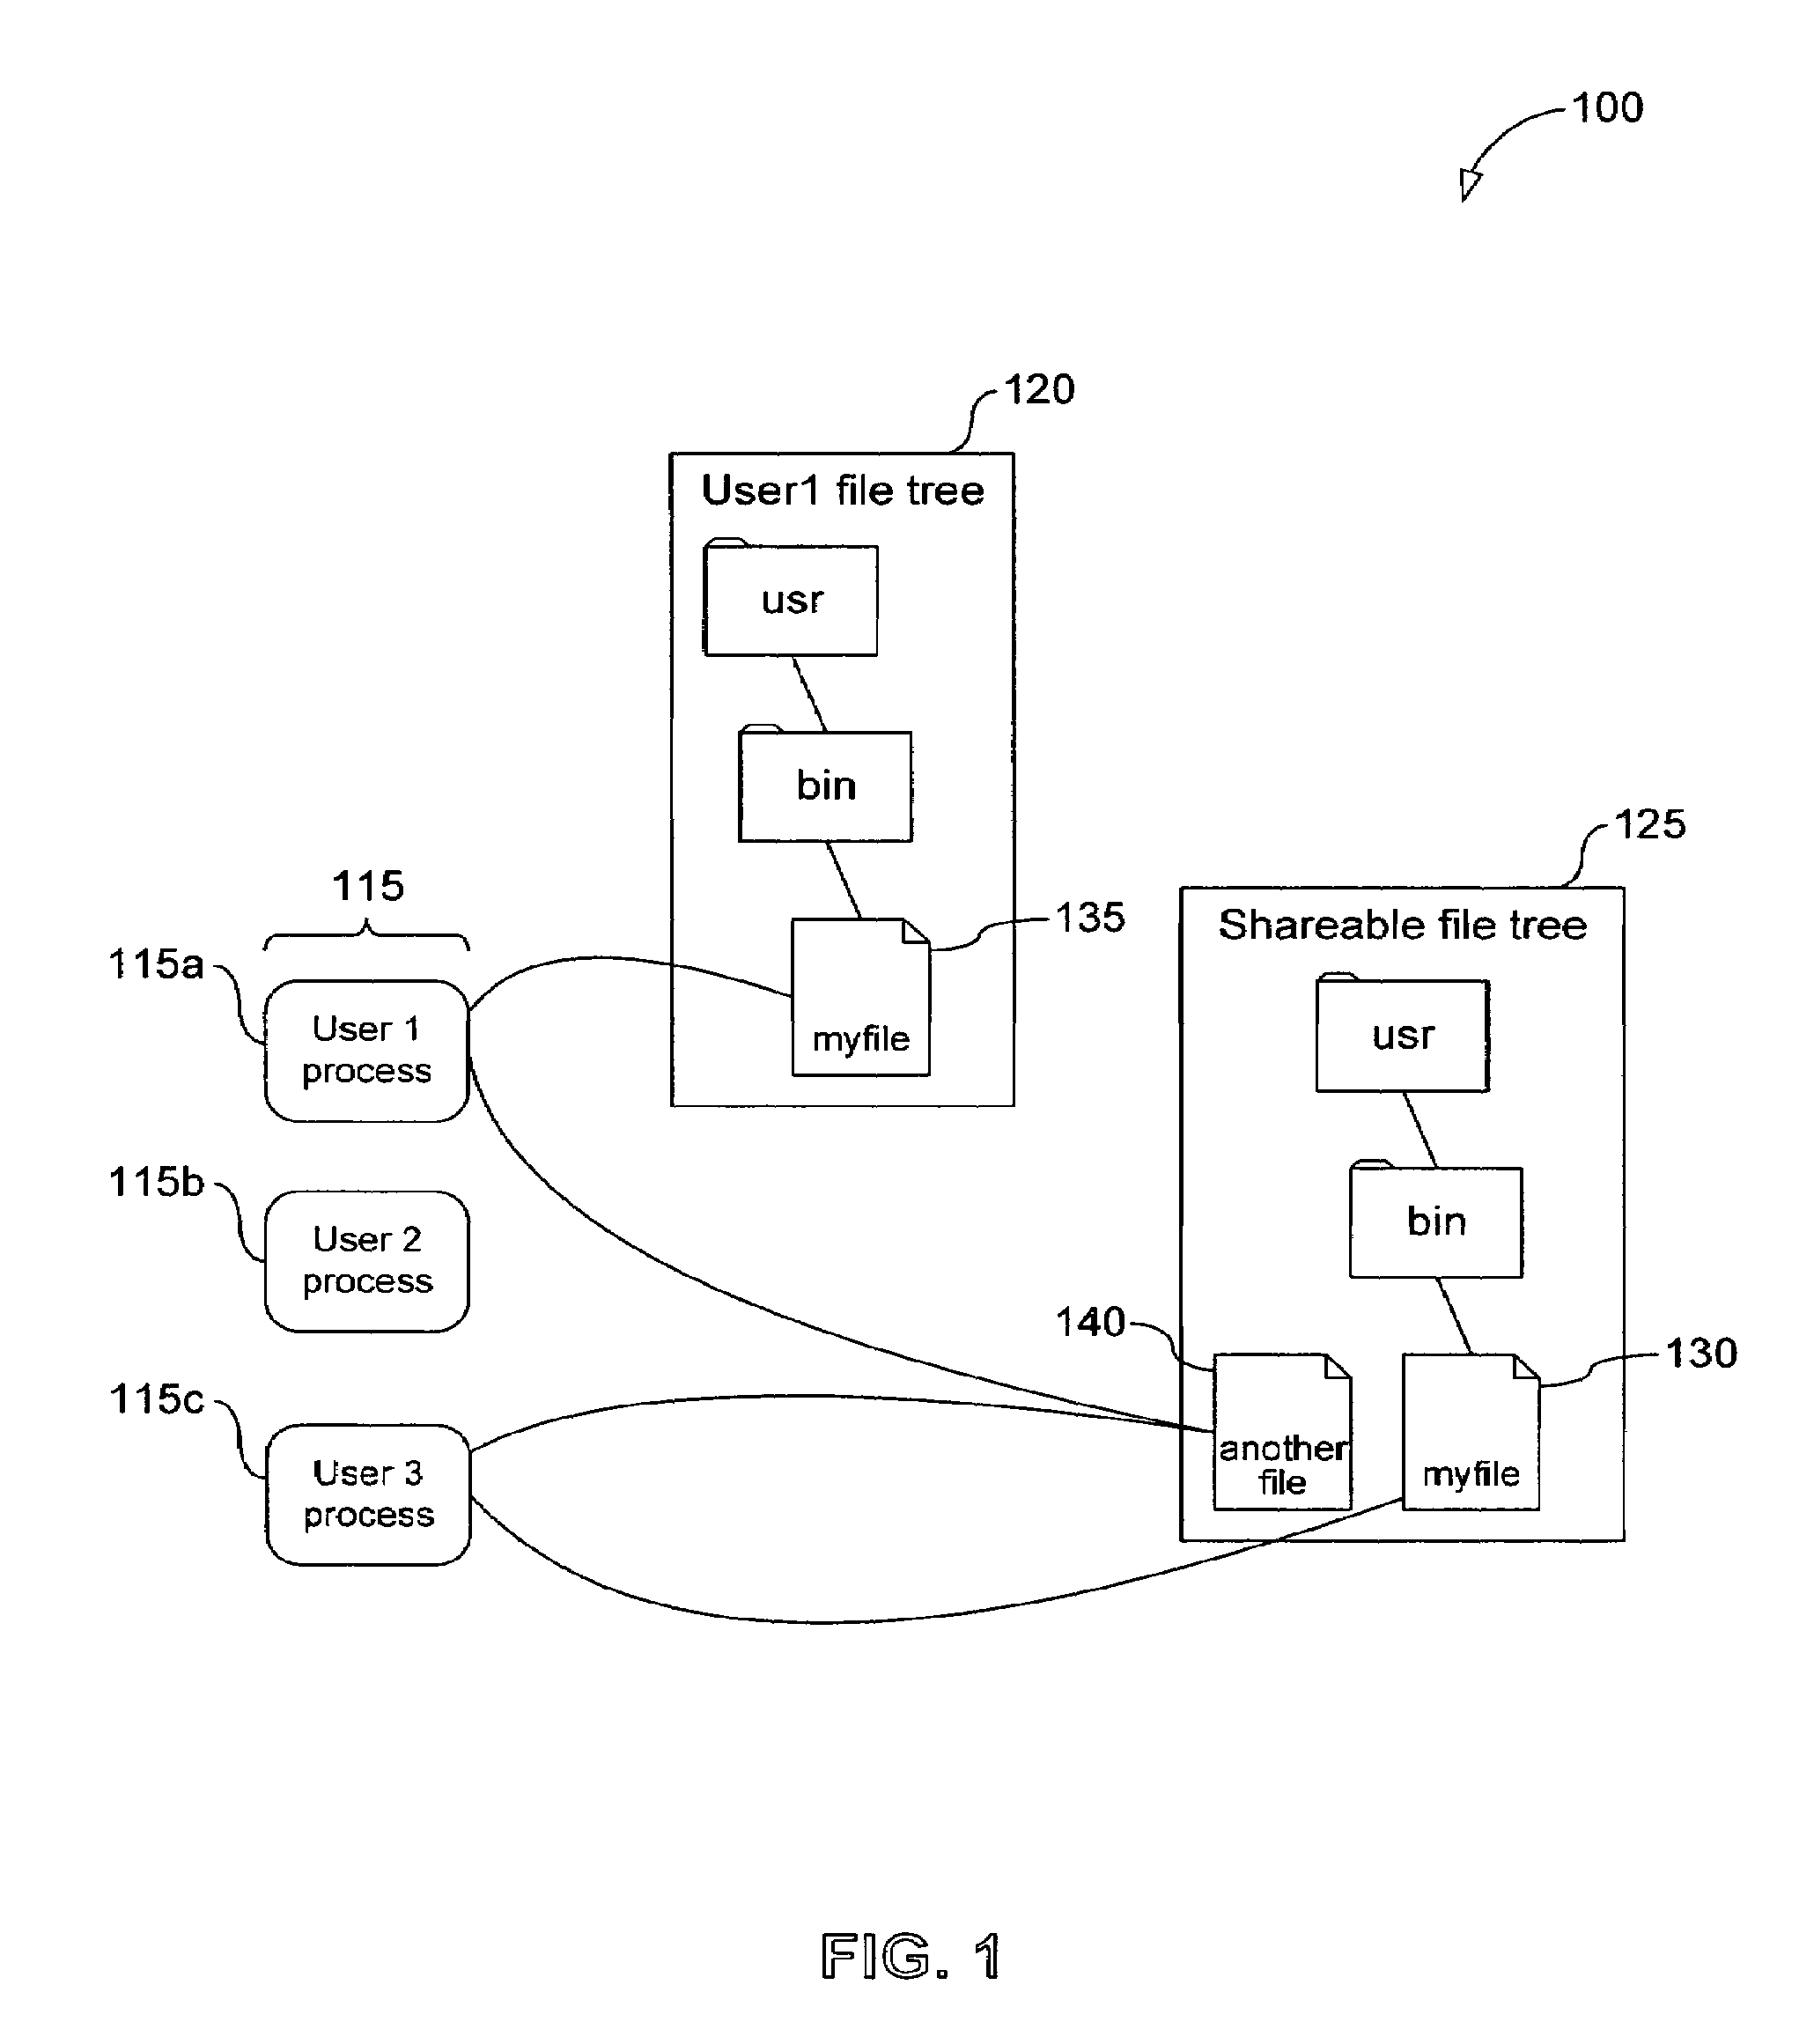 System, method and computer program product for multi-level file-sharing by concurrent users